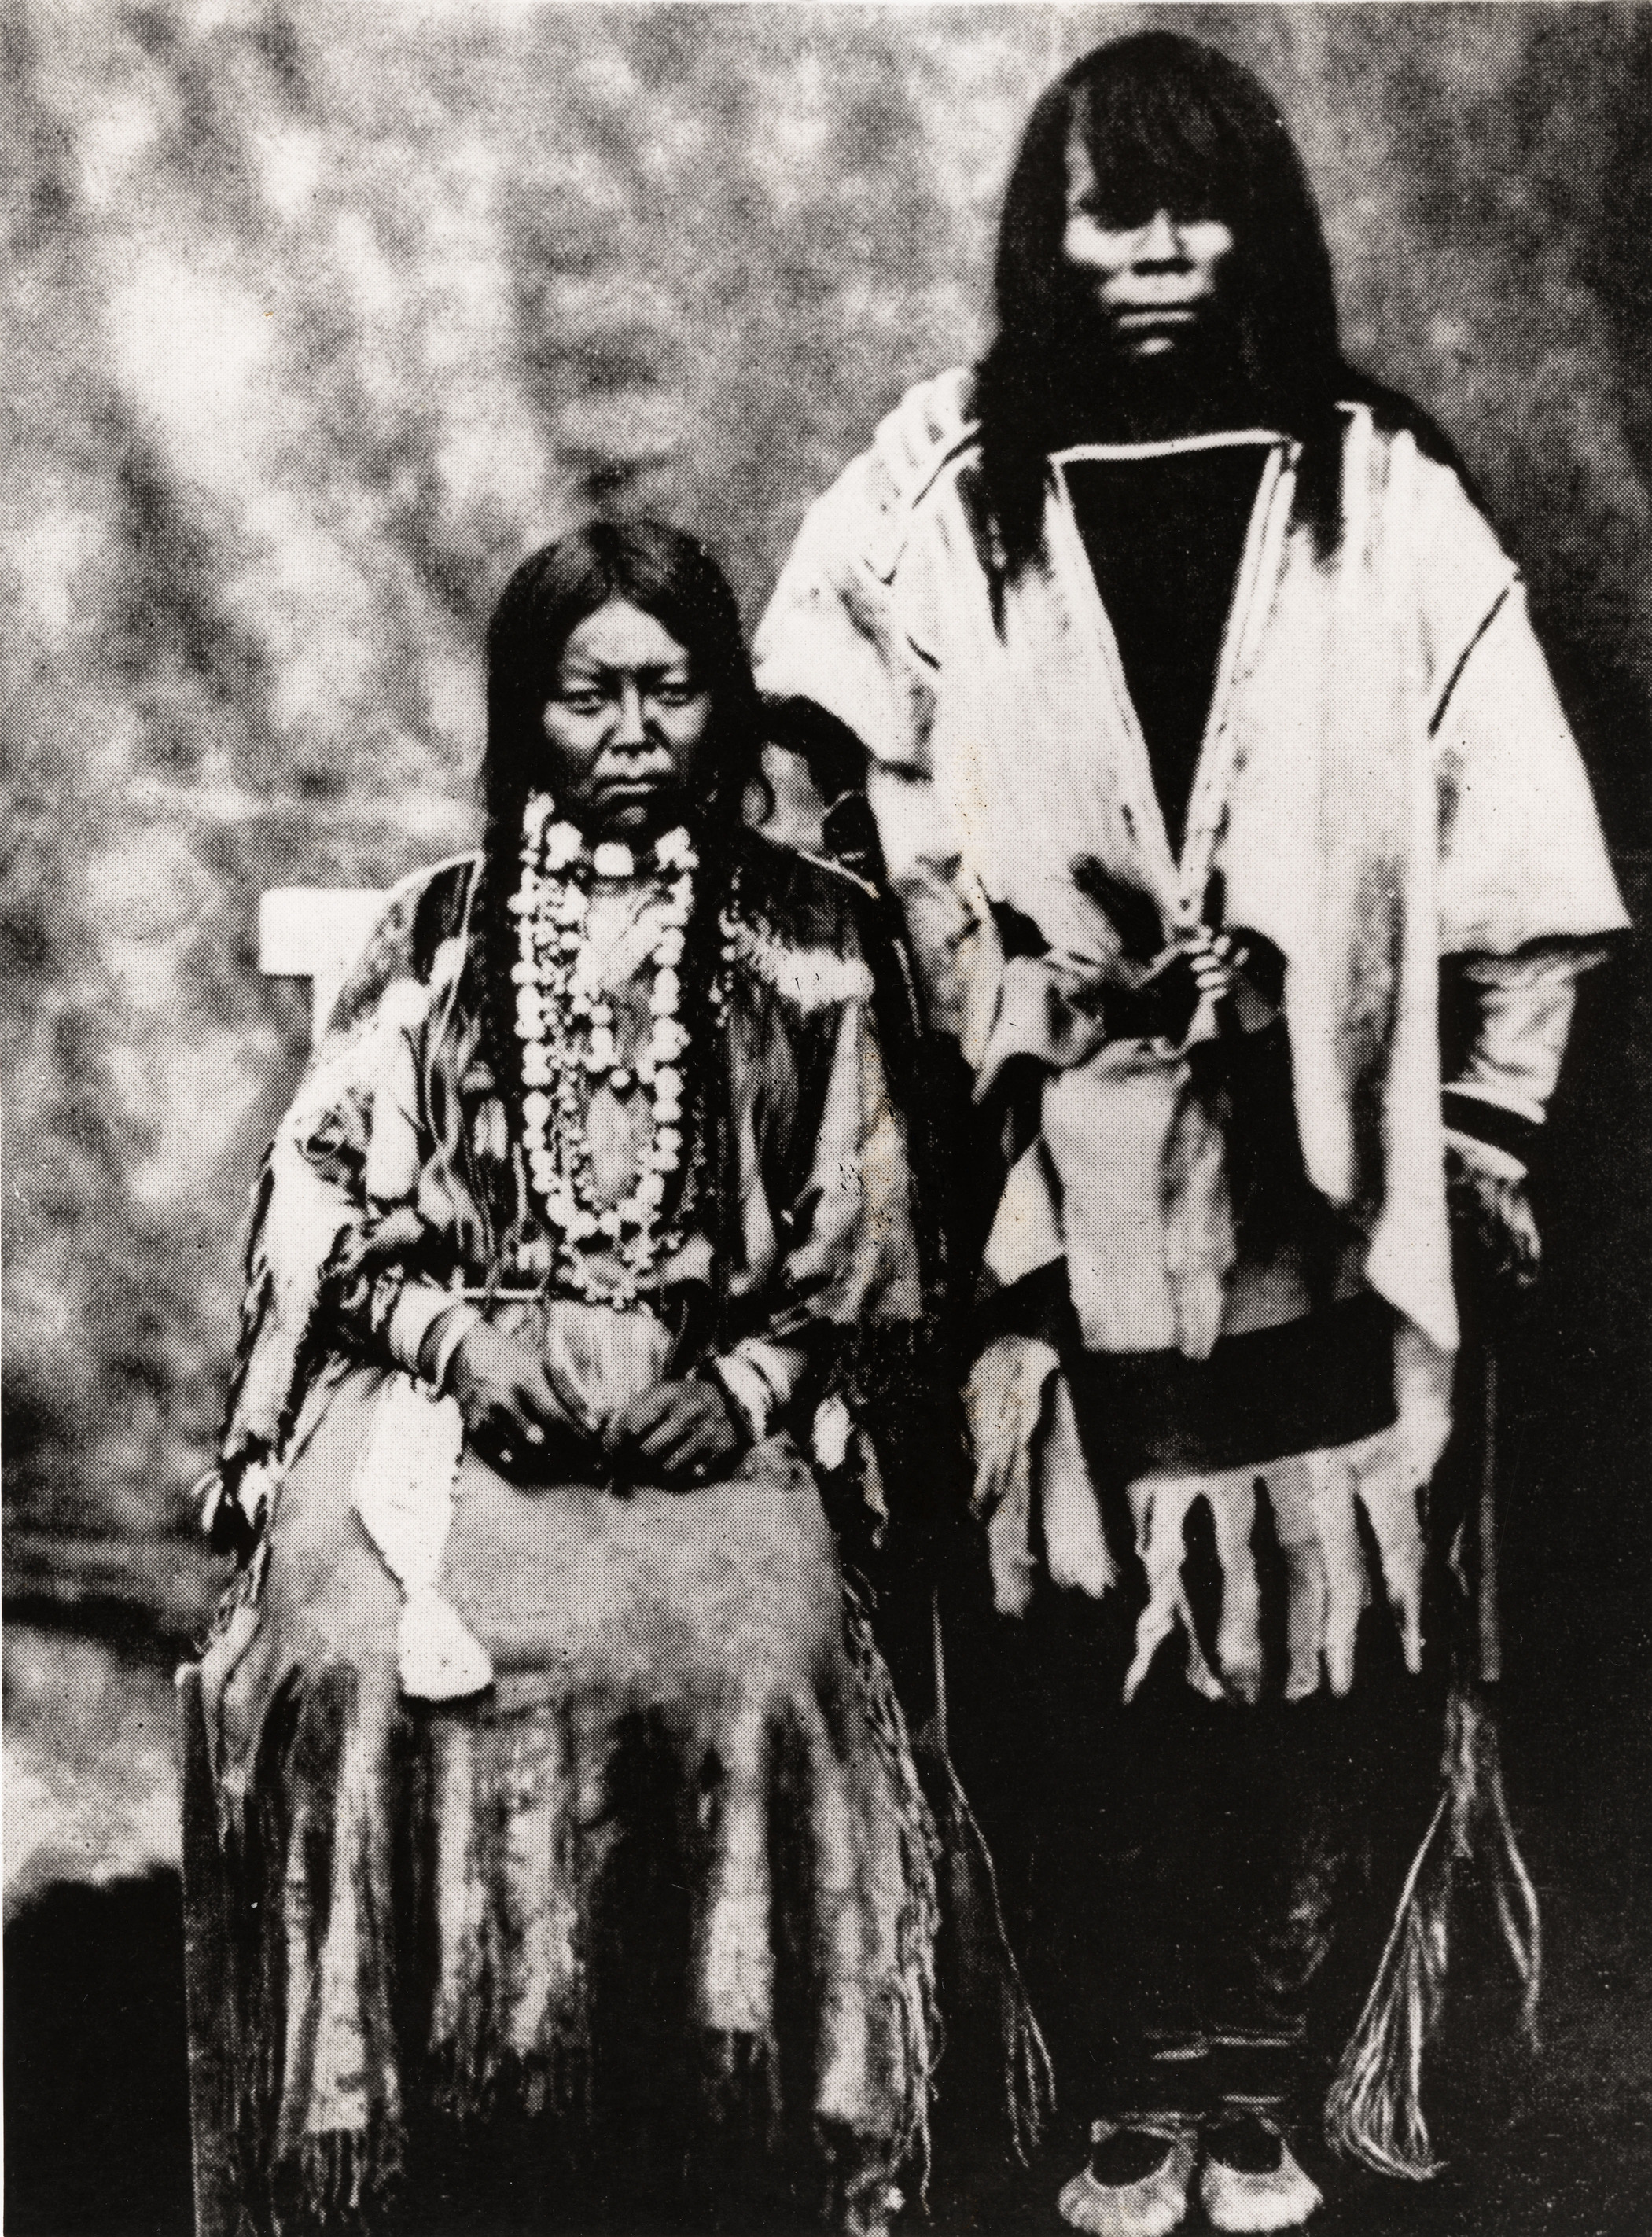 Black and white photograph of two American Indians posing for a portraits, one standing and one seated